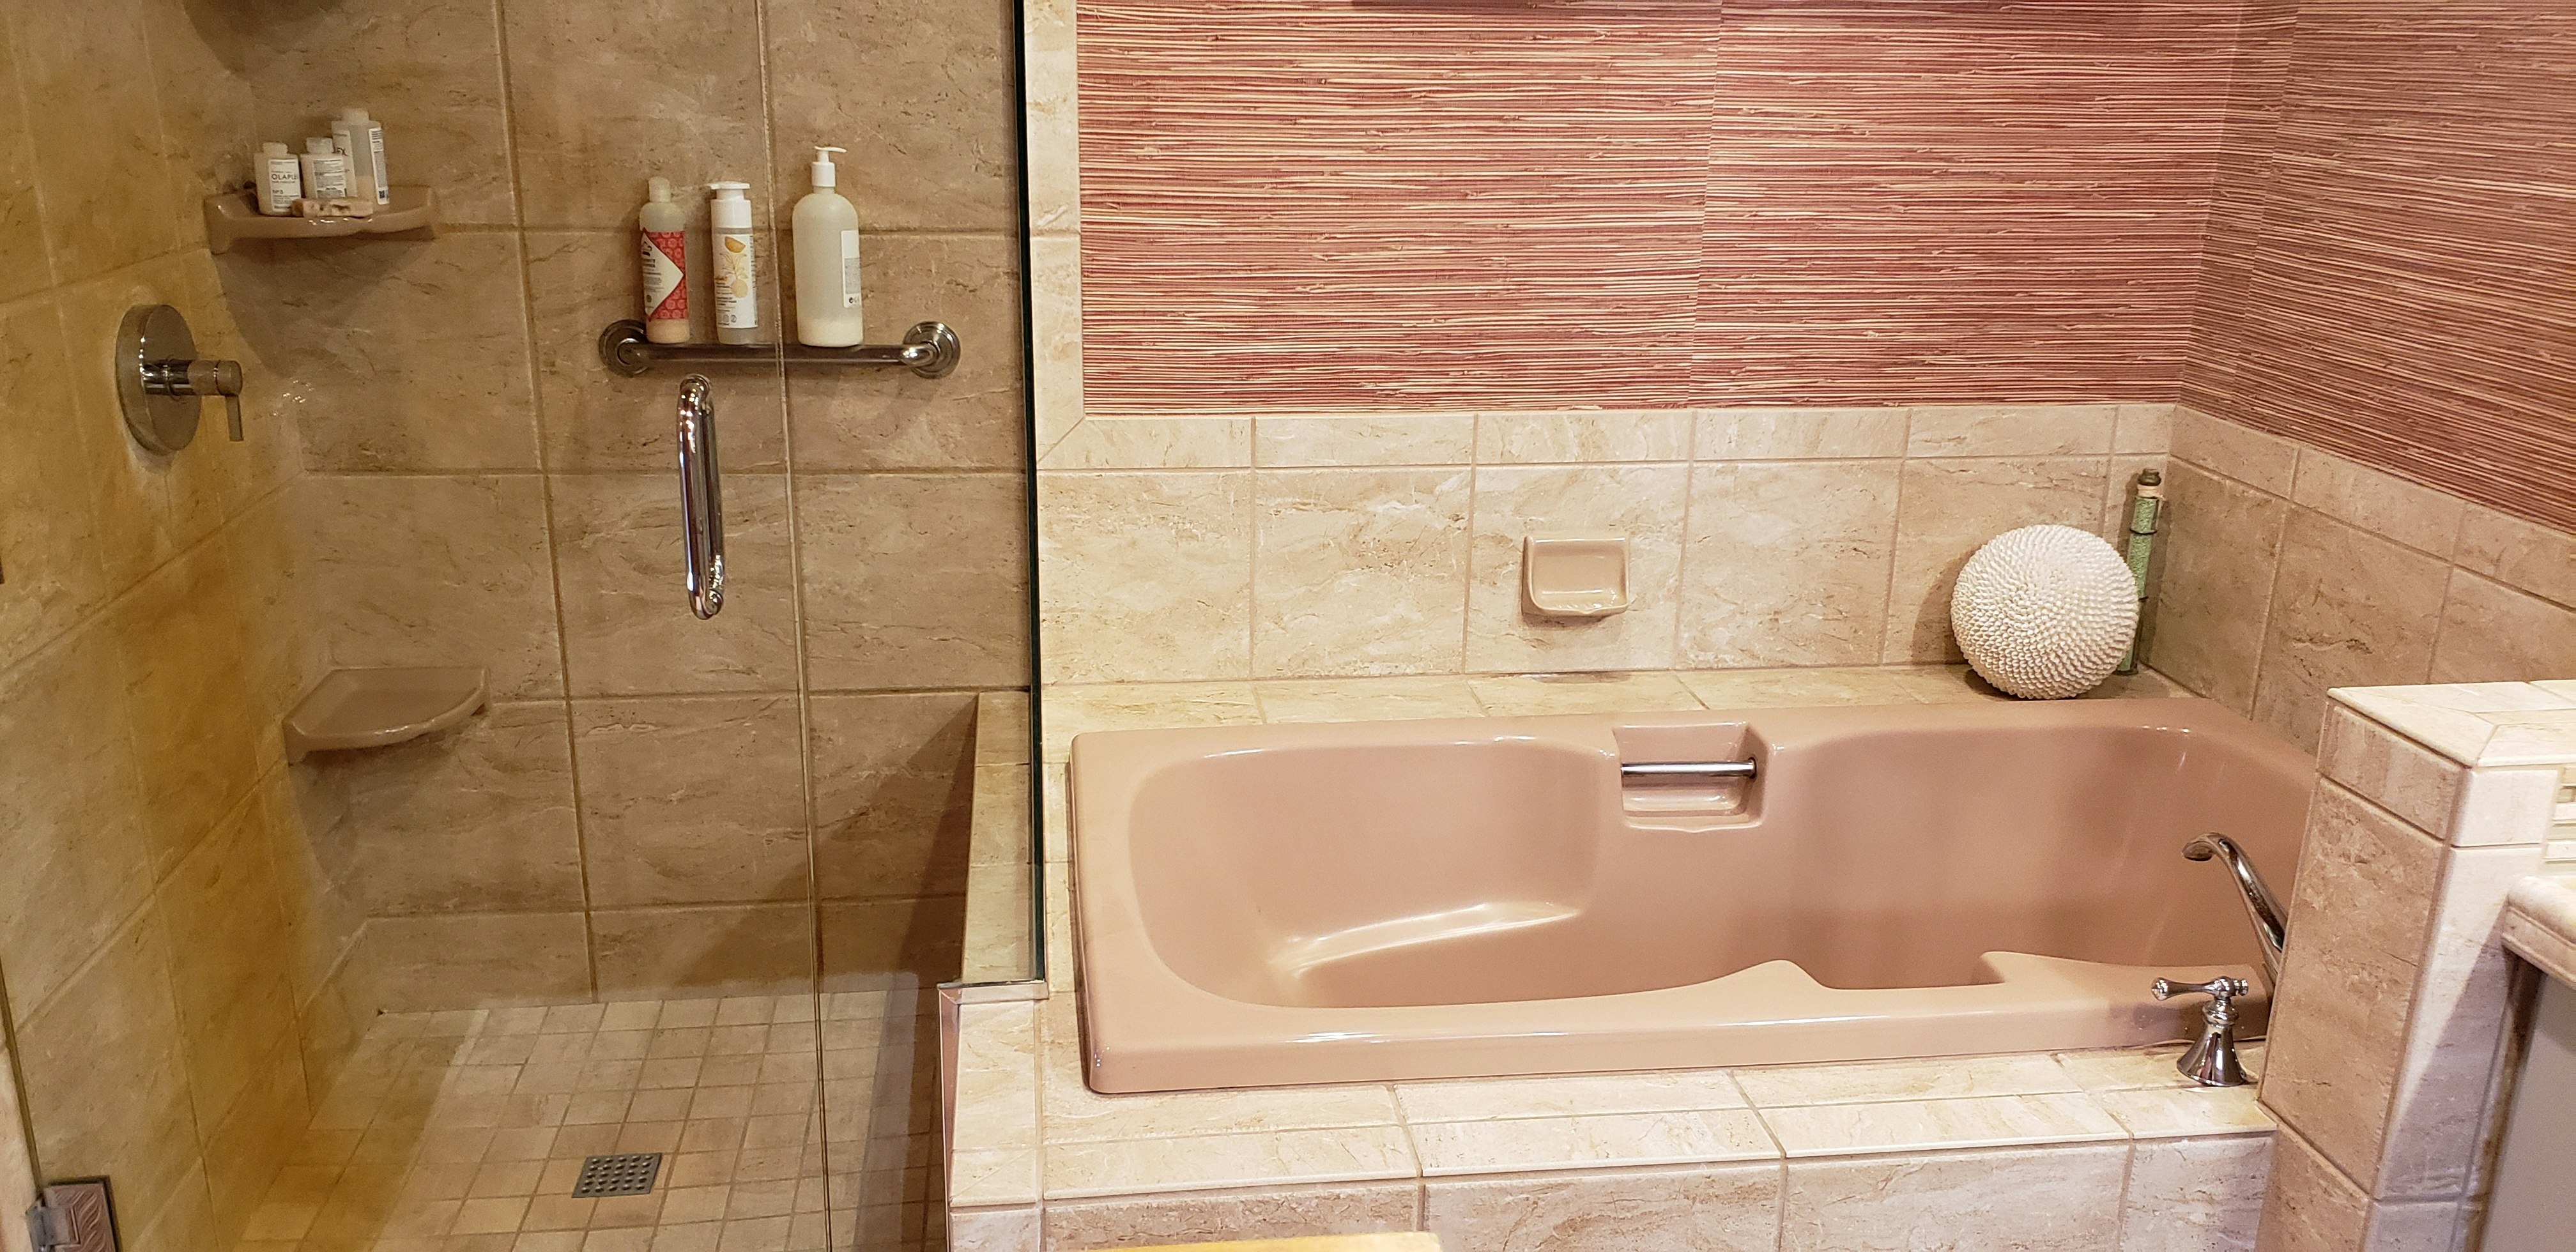 There's room for a cozy bath or shower, whichever is preferred.